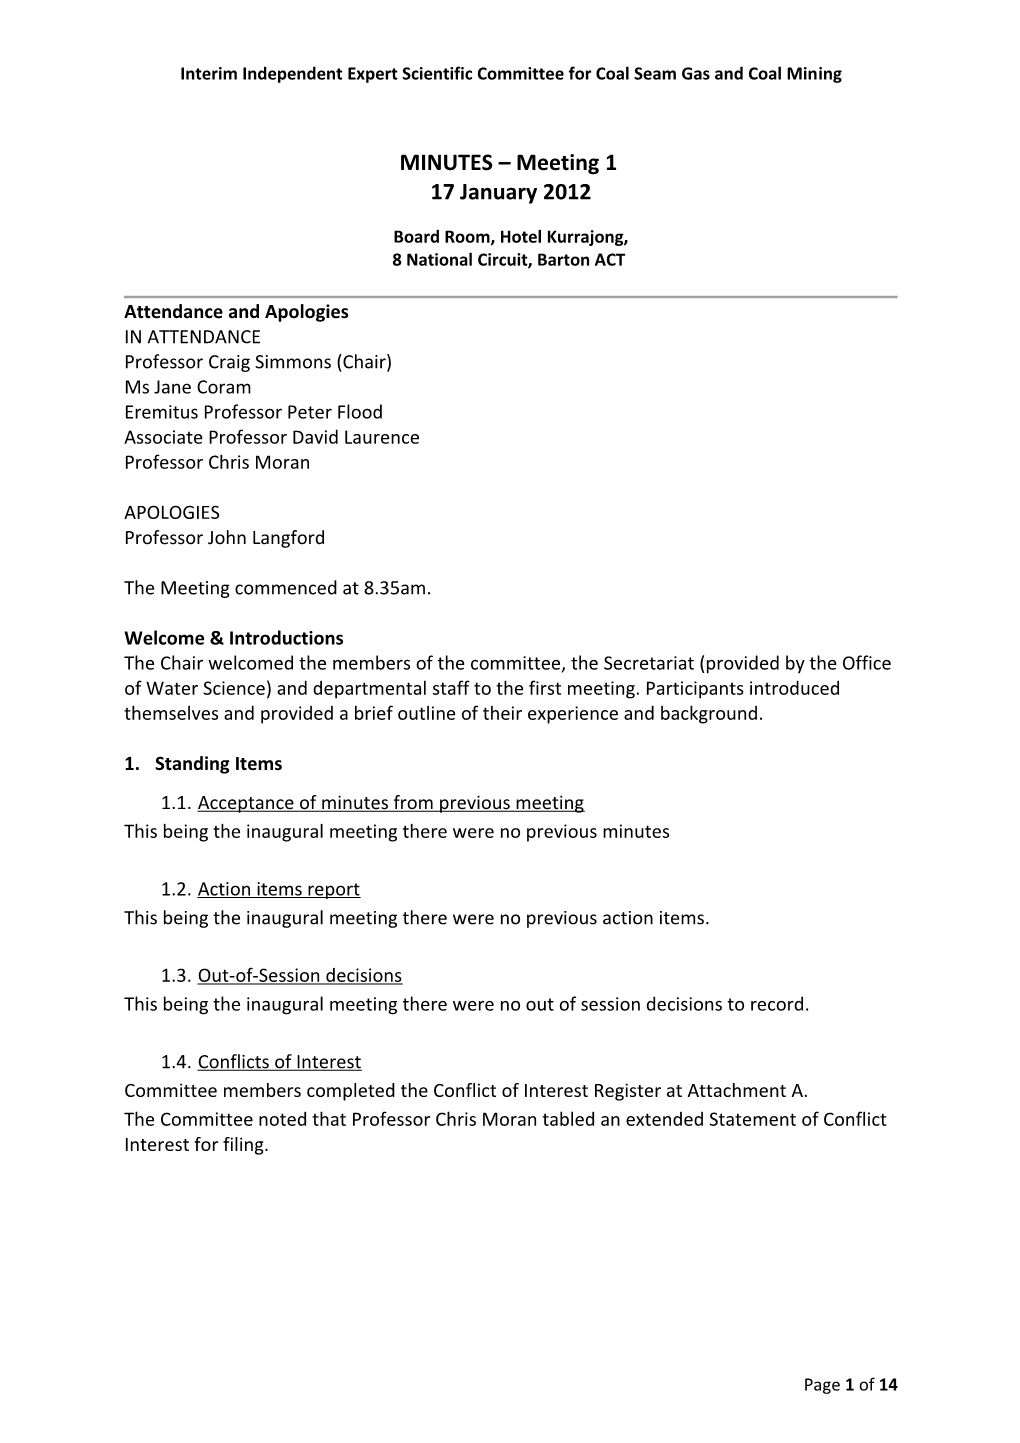 Interim Independent Expert Scientific Committee for Coal Seam Gas and Coal Mining - Minutes